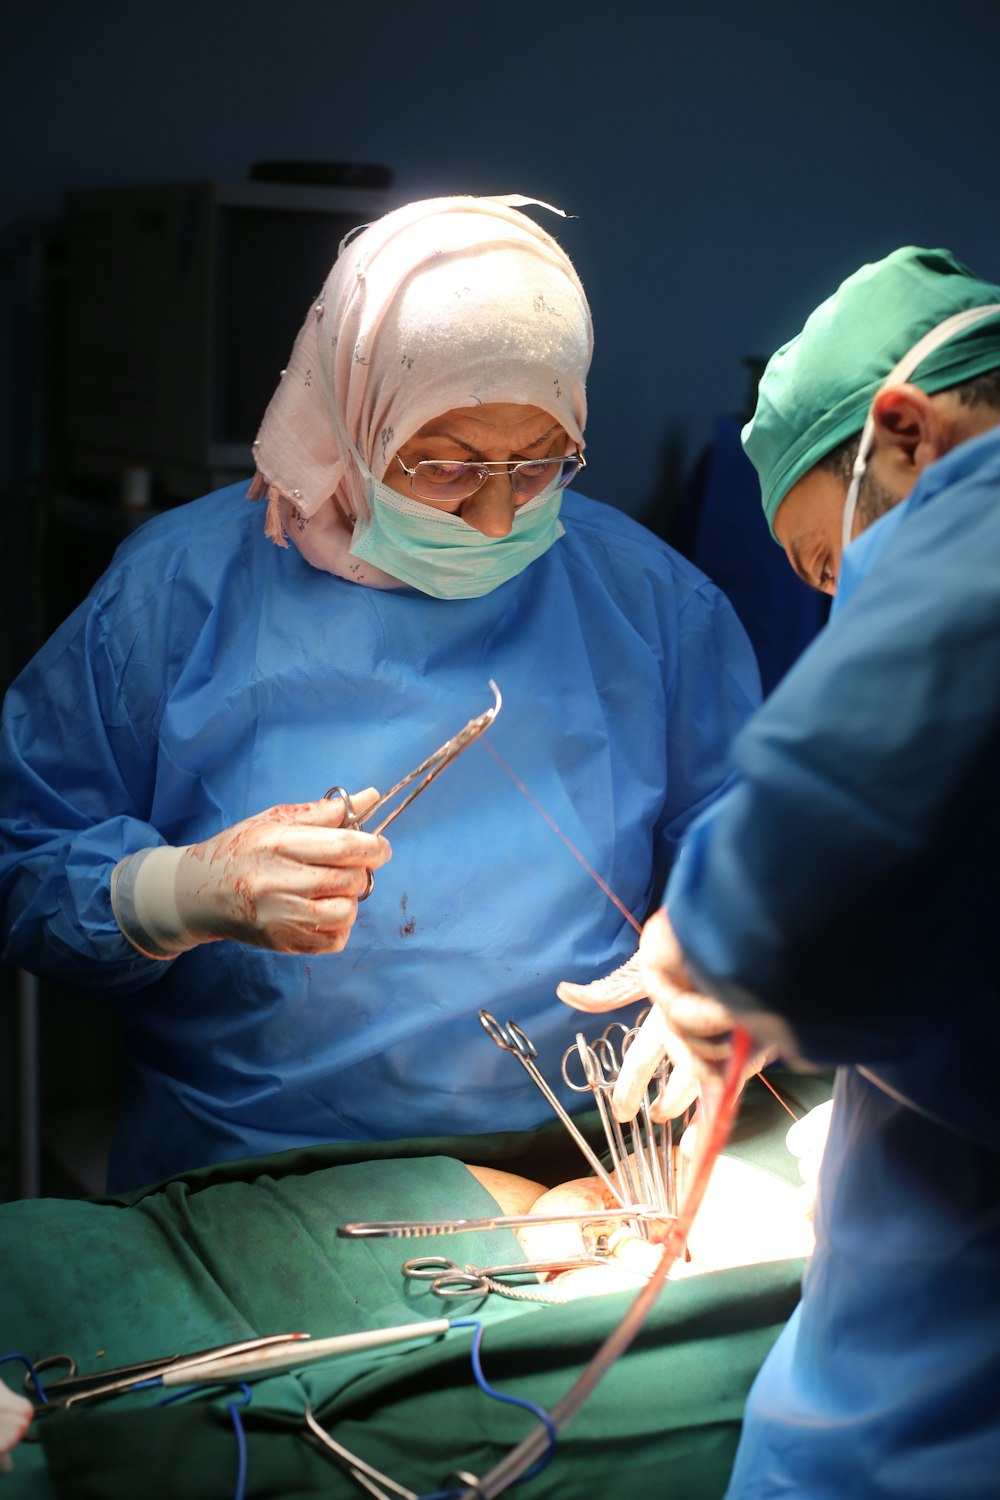 two surgeons performing surgery on a patient